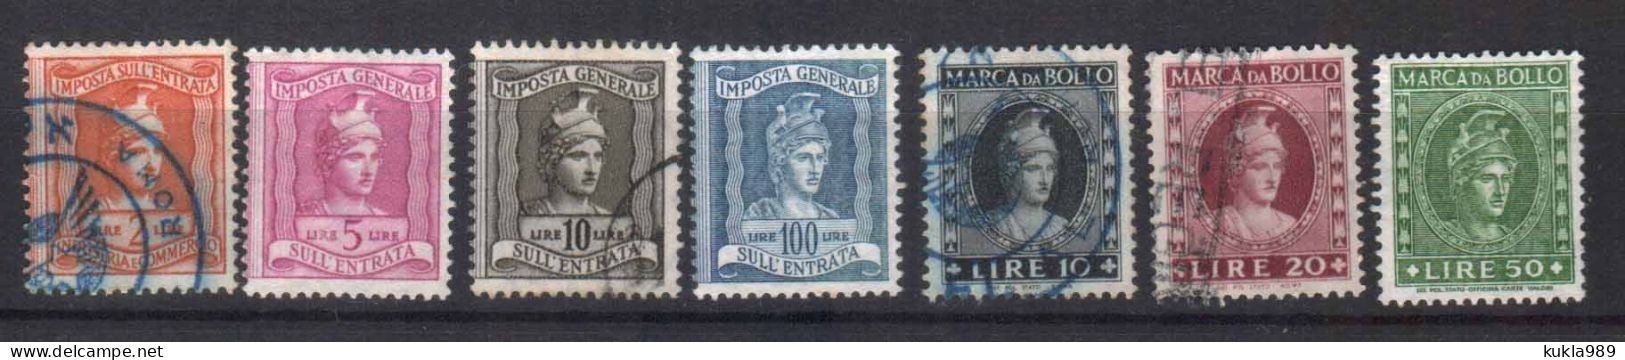 ITALY , C.1950s FISCAL REVENUE TAX 7 STAMPS - Steuermarken